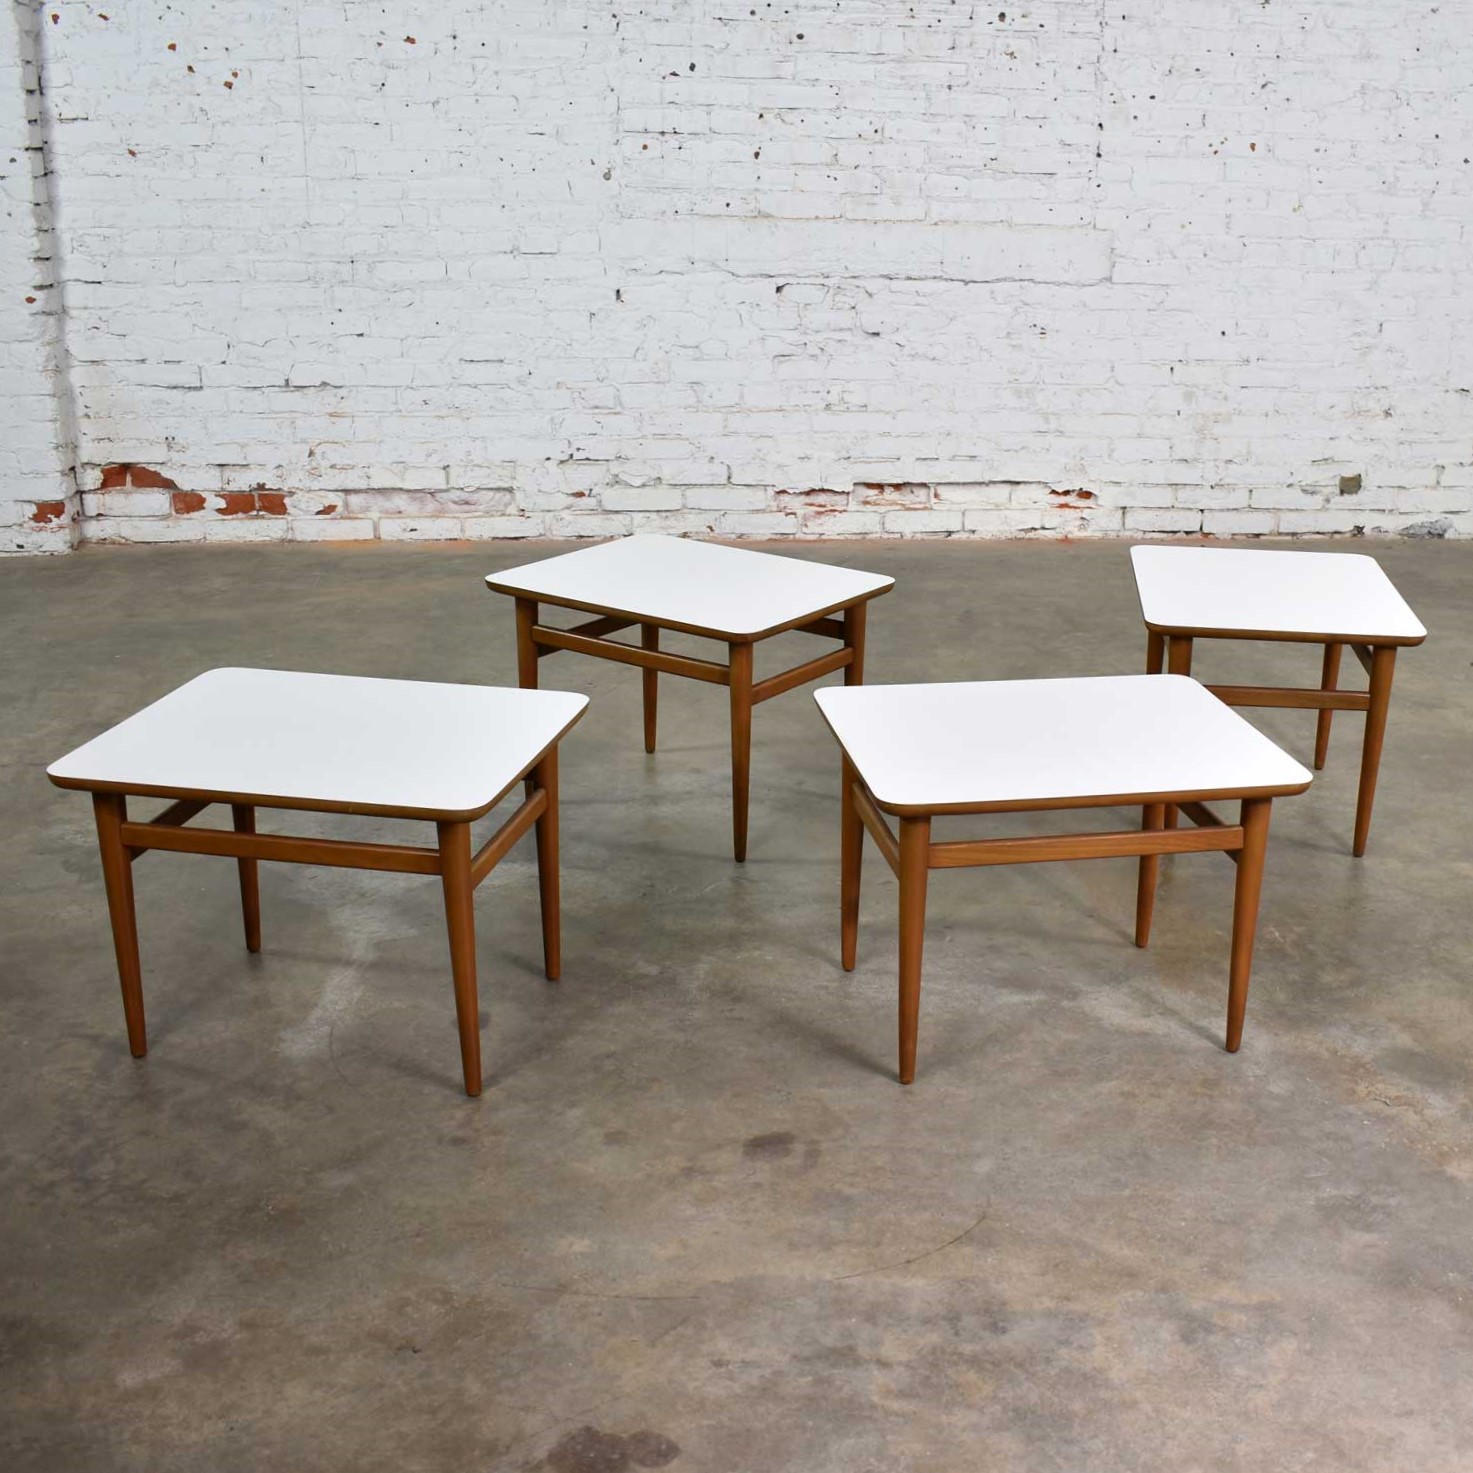 Set of 4 Mid Century Modern Birch Side Tables with White Laminate Tops & Tapered Legs